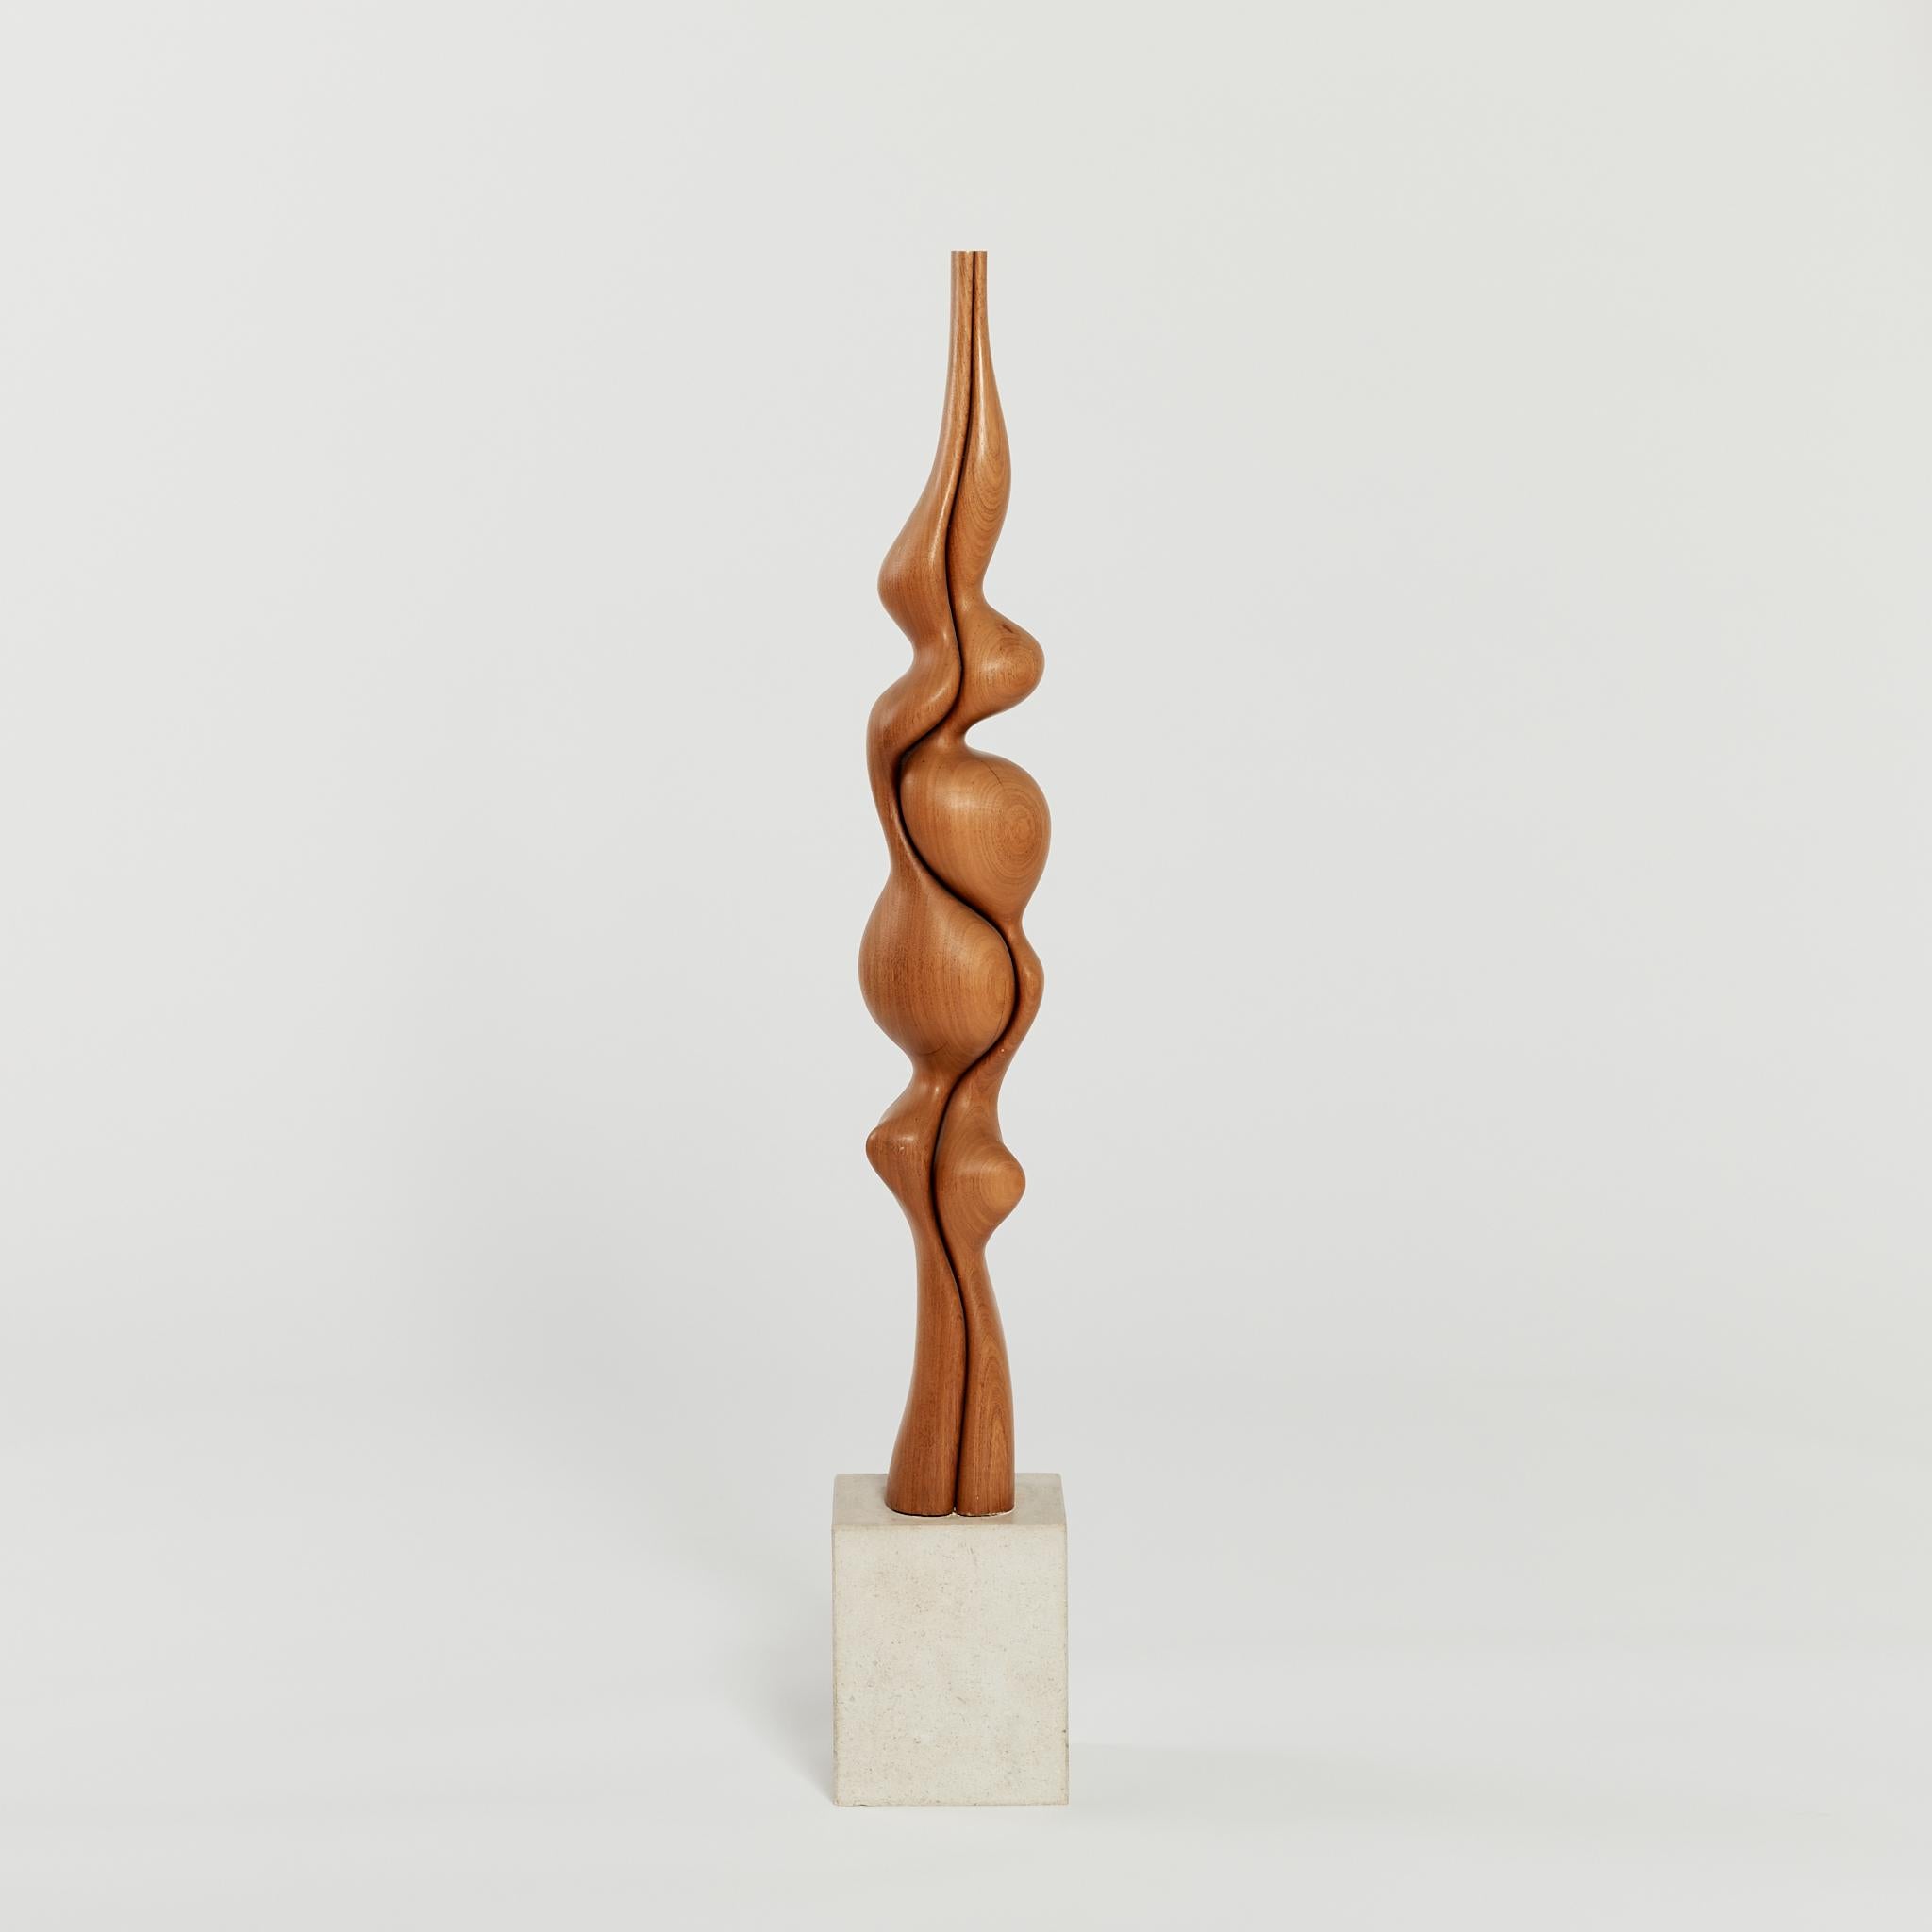 Late 20th Century Tall Biomorphic Wood Floor Sculpture with Concrete Plinth